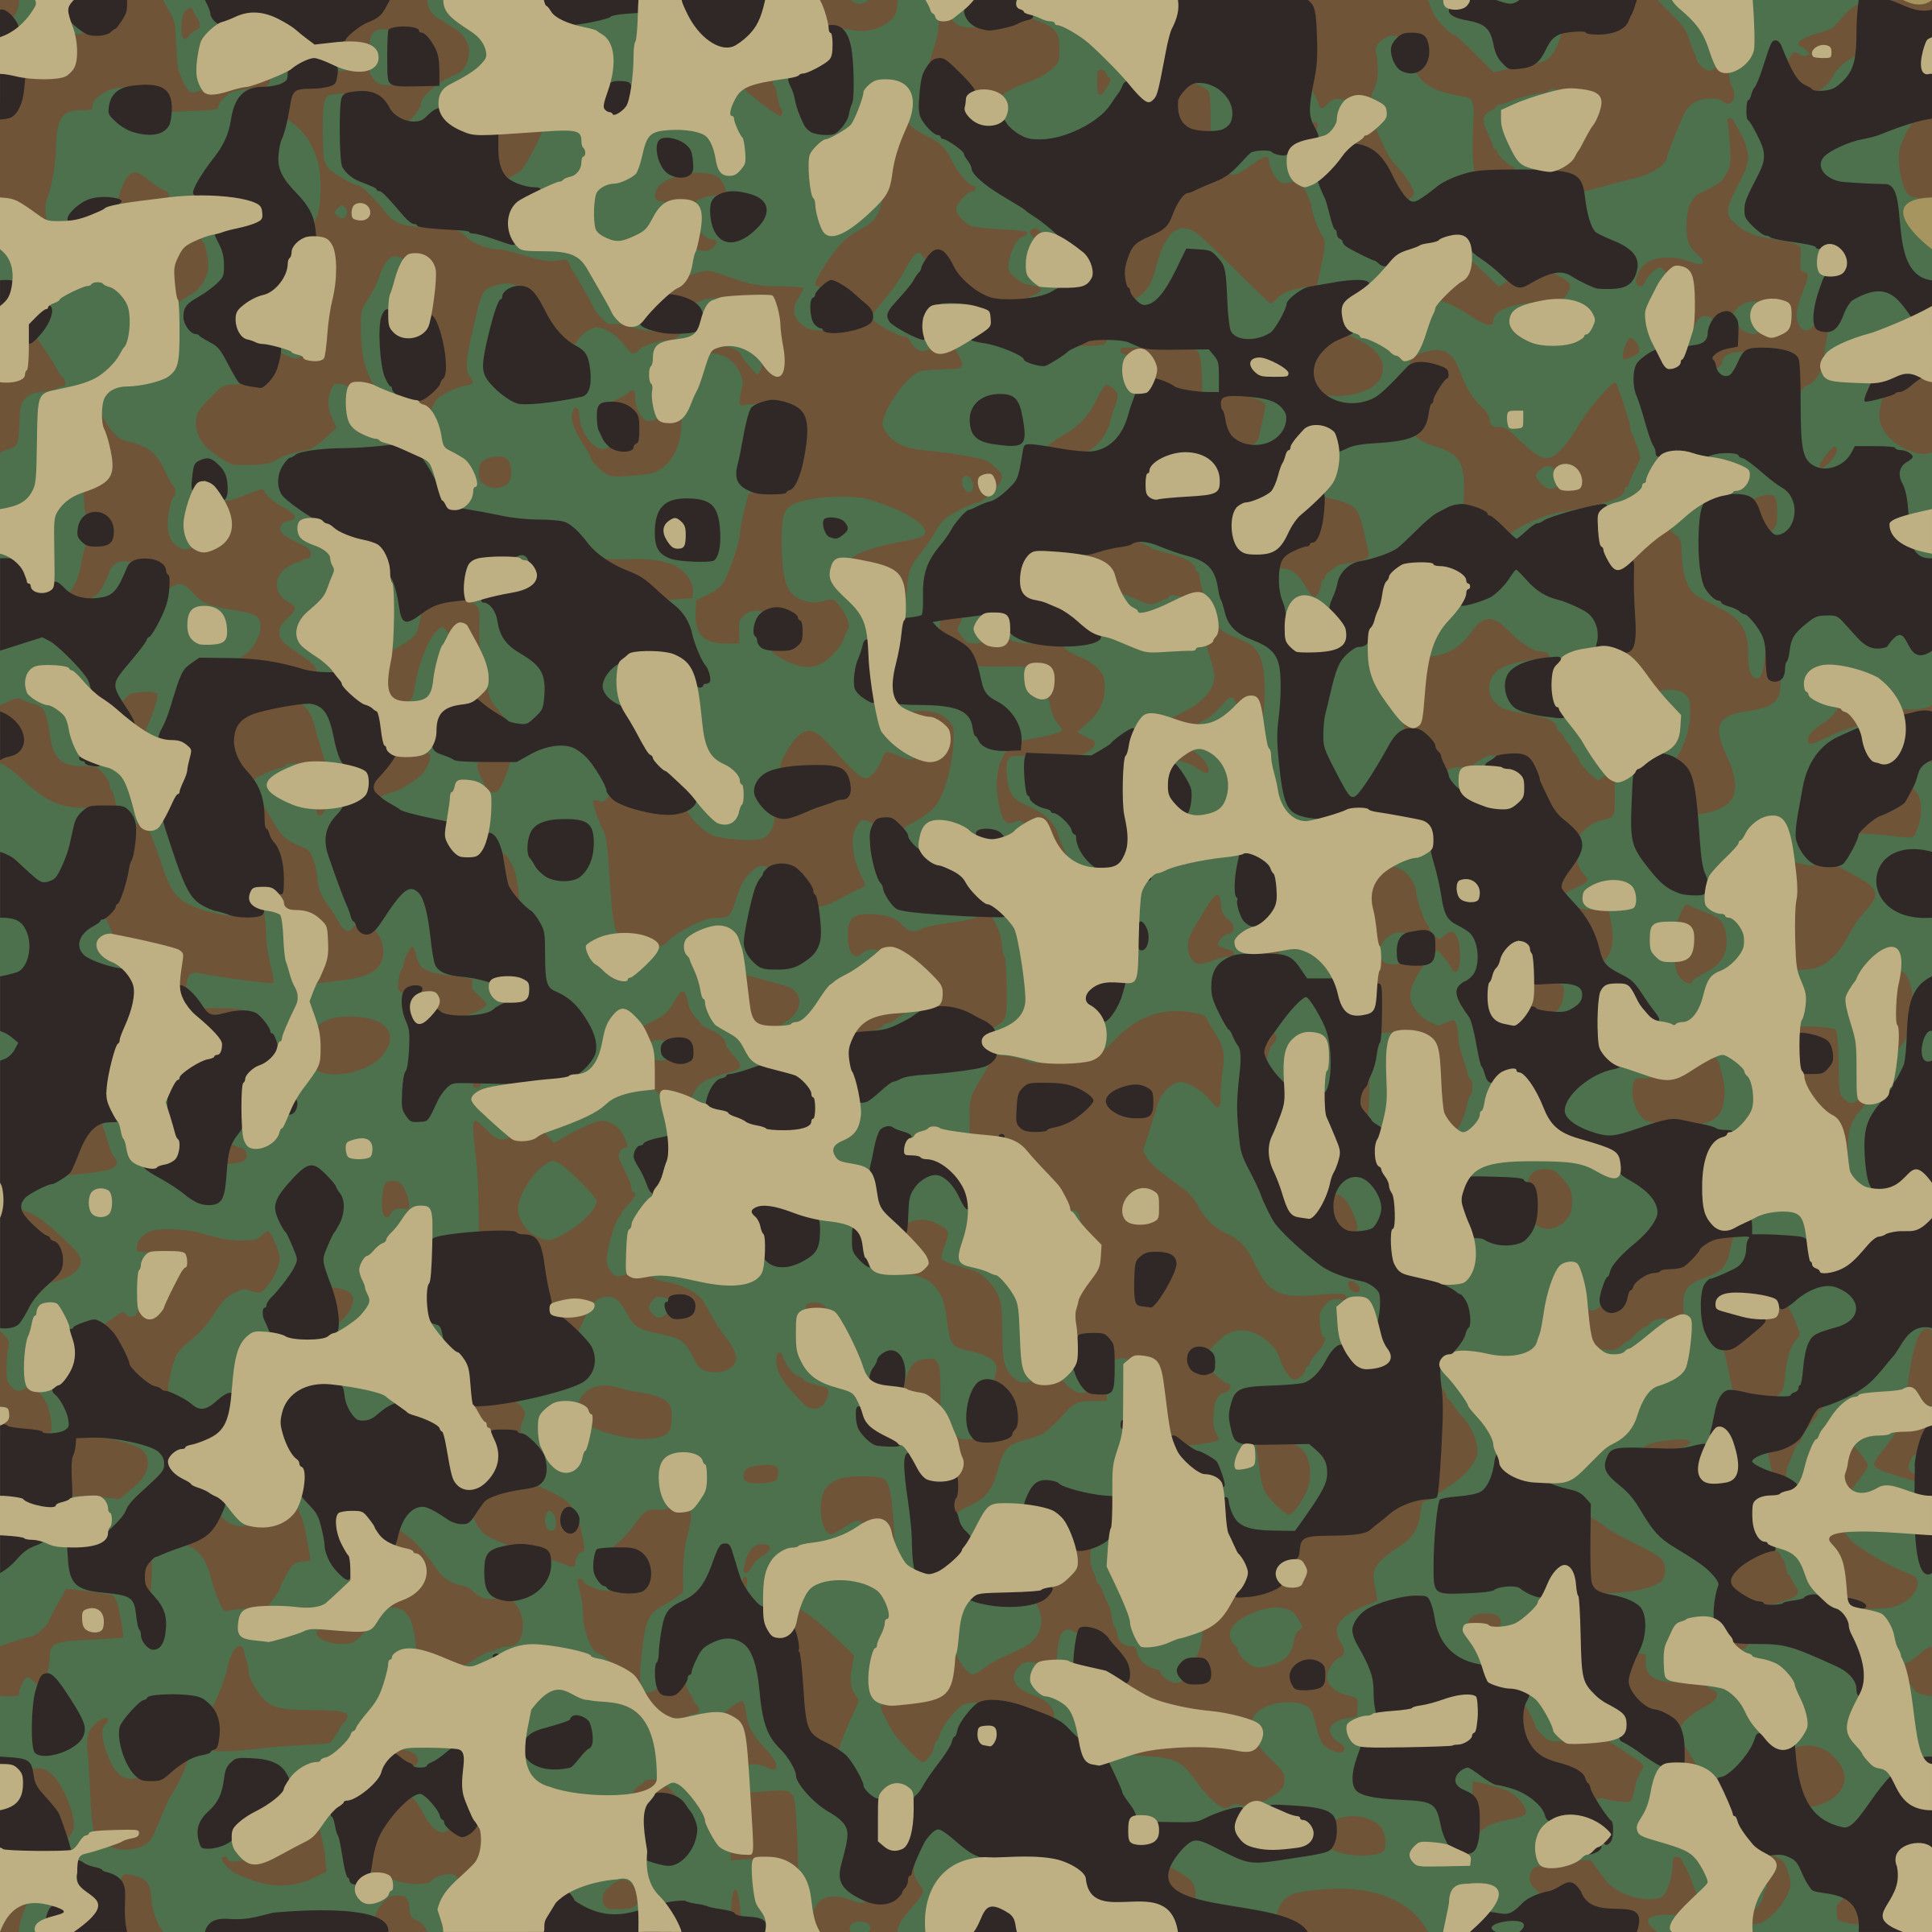 Army Camo Wallpapers on WallpaperDog